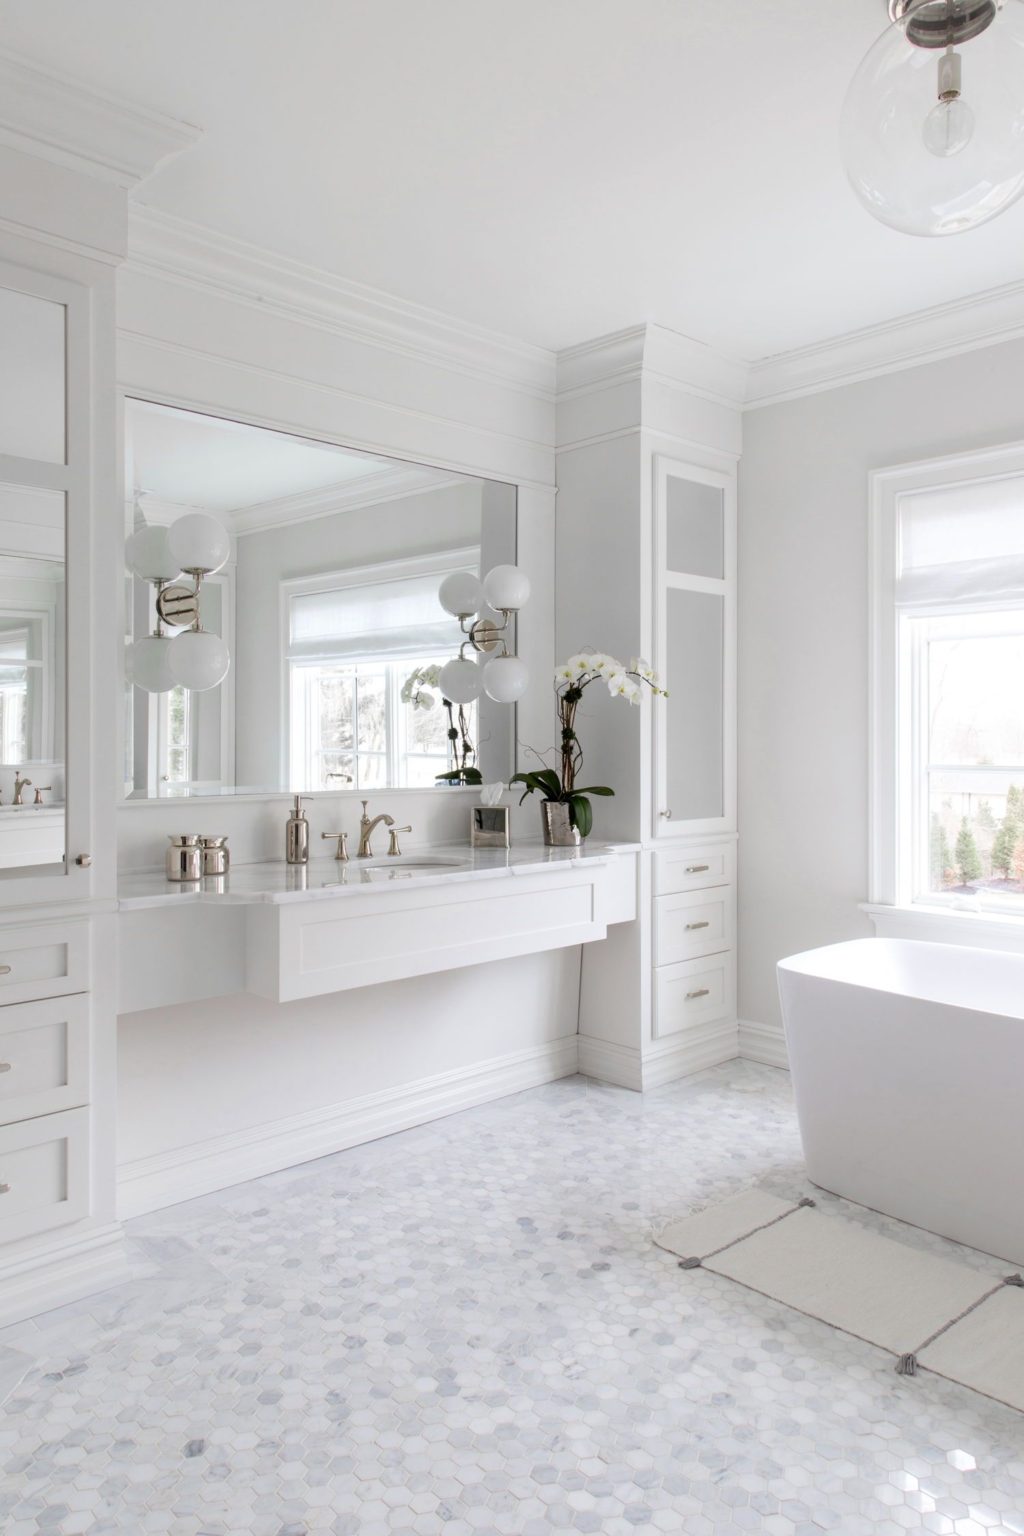 All-whites-design.-1024x1536 Top 10 Outdated Bathroom Design Trends to Avoid in 2022